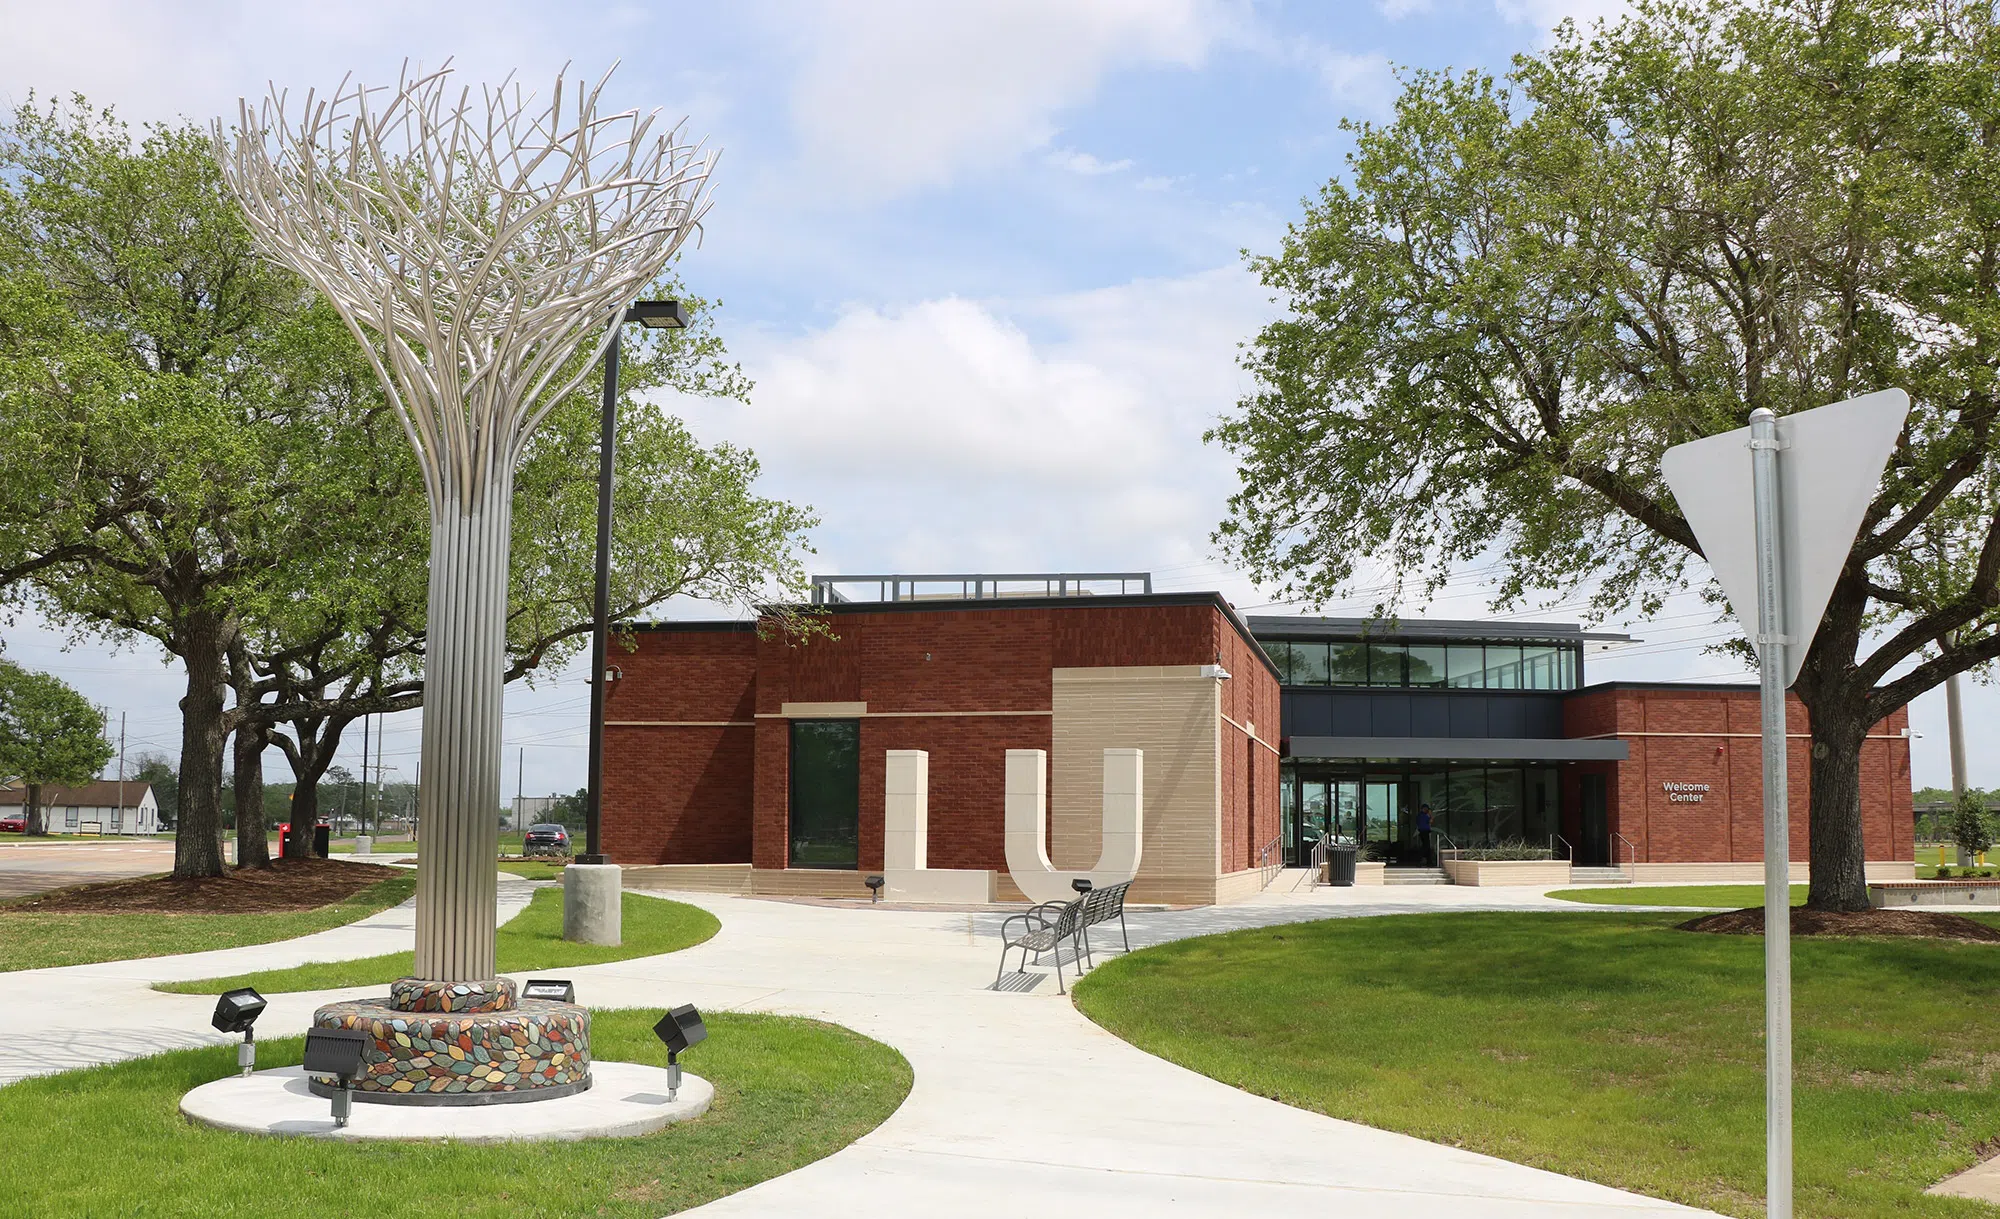 image of green grass, metal tree statue, LU statue and red building labeled as Ken and Nancy Evan Welcome Center